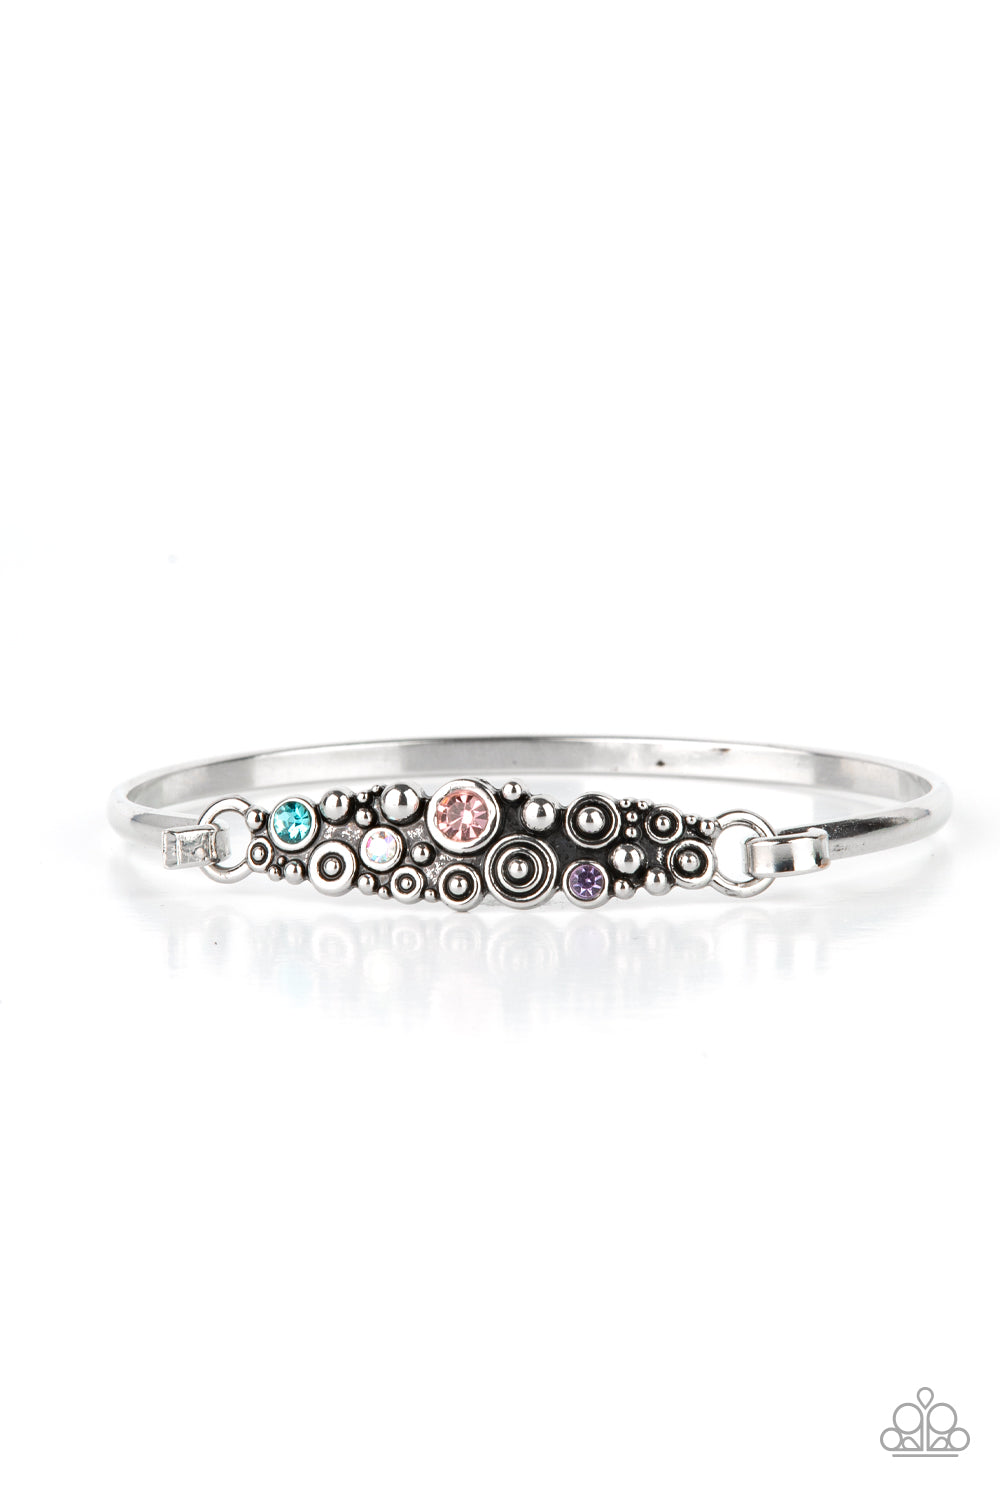 Bubbling Whimsy Multi Cuff Bracelet - Paparazzi Accessories  A cluster of engraved and antiqued silver swirls merge with colorful rhinestones and coalesce into a whimsical display across the wrist on a dainty silver cuff. Features a hook and eye closure.  Sold as one individual bracelet.